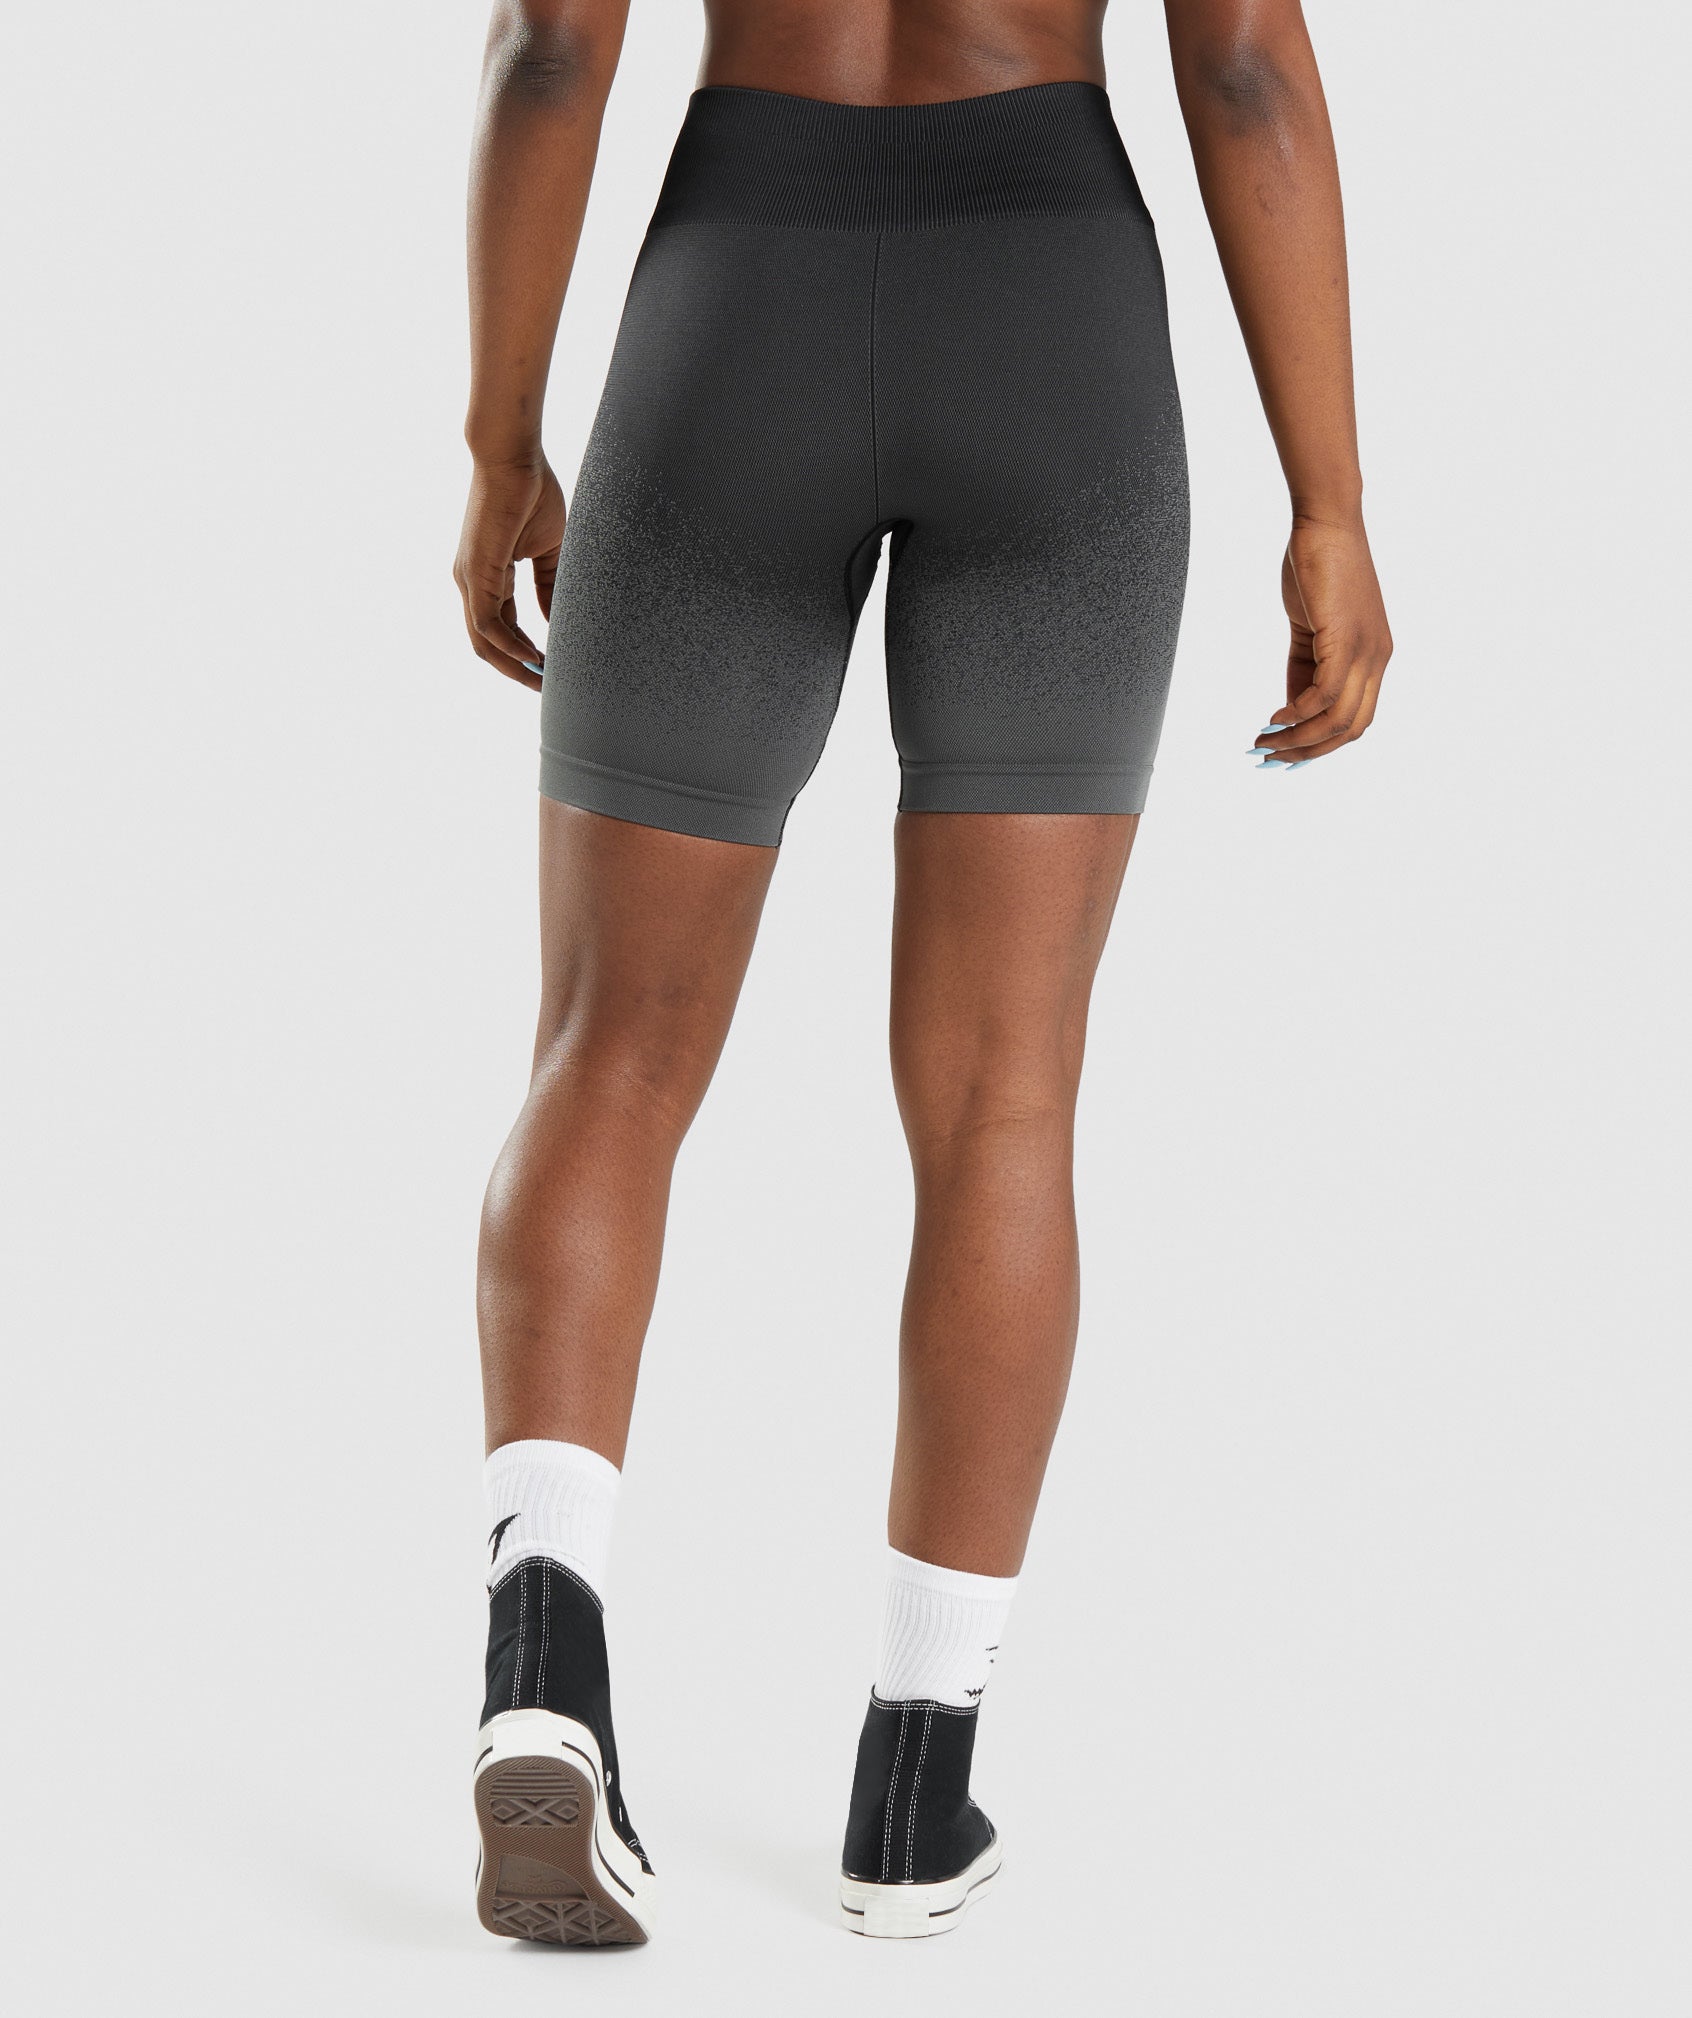 Adapt Ombre Seamless Cycling Shorts in Black/Grey - view 2